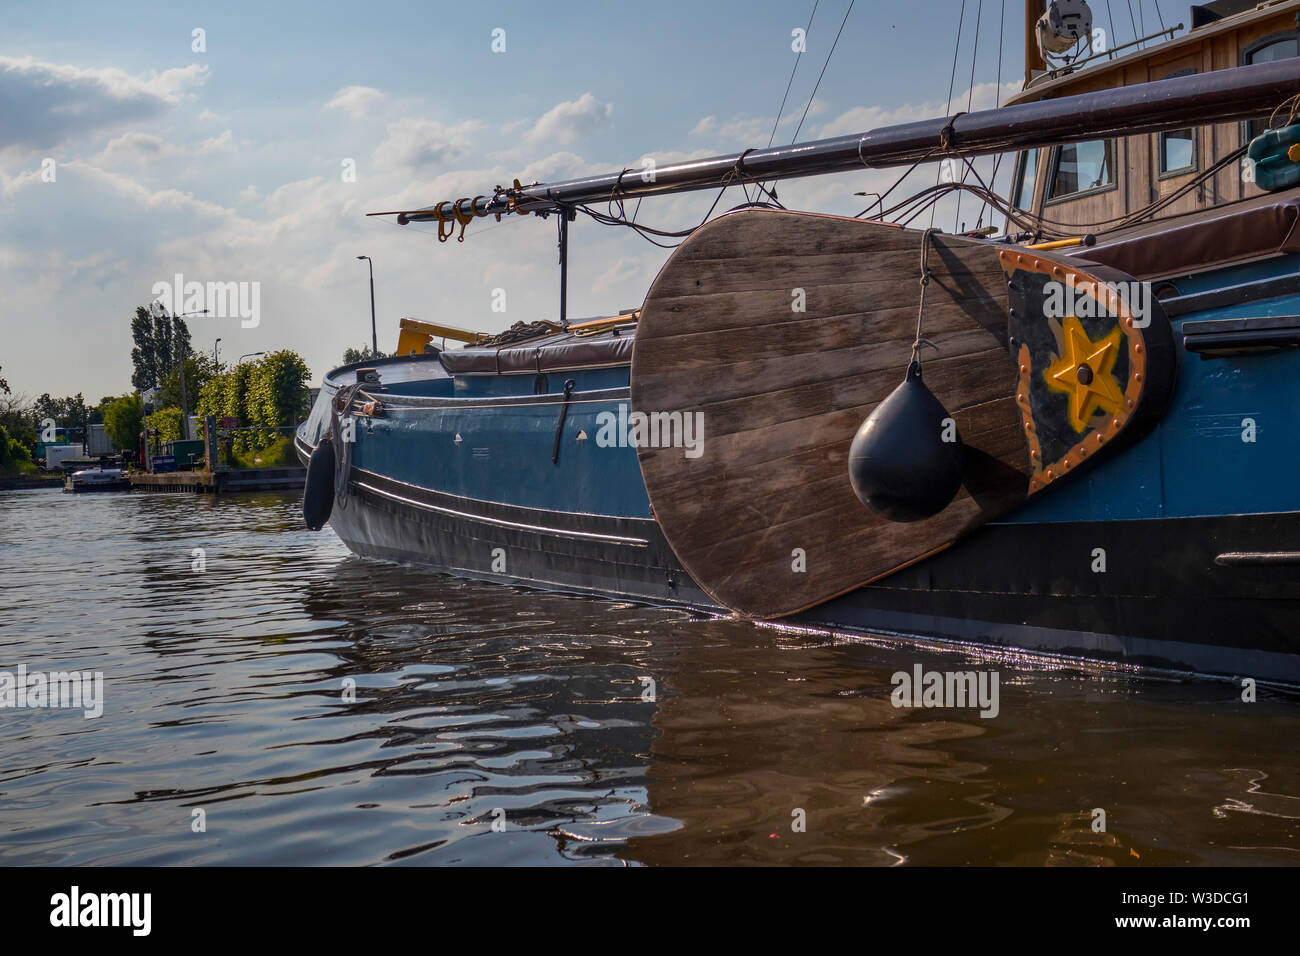 Amsterdam, Holland - June 22, 2019: Wooden Leebord of a historical sailboat in the canal Stock Photo